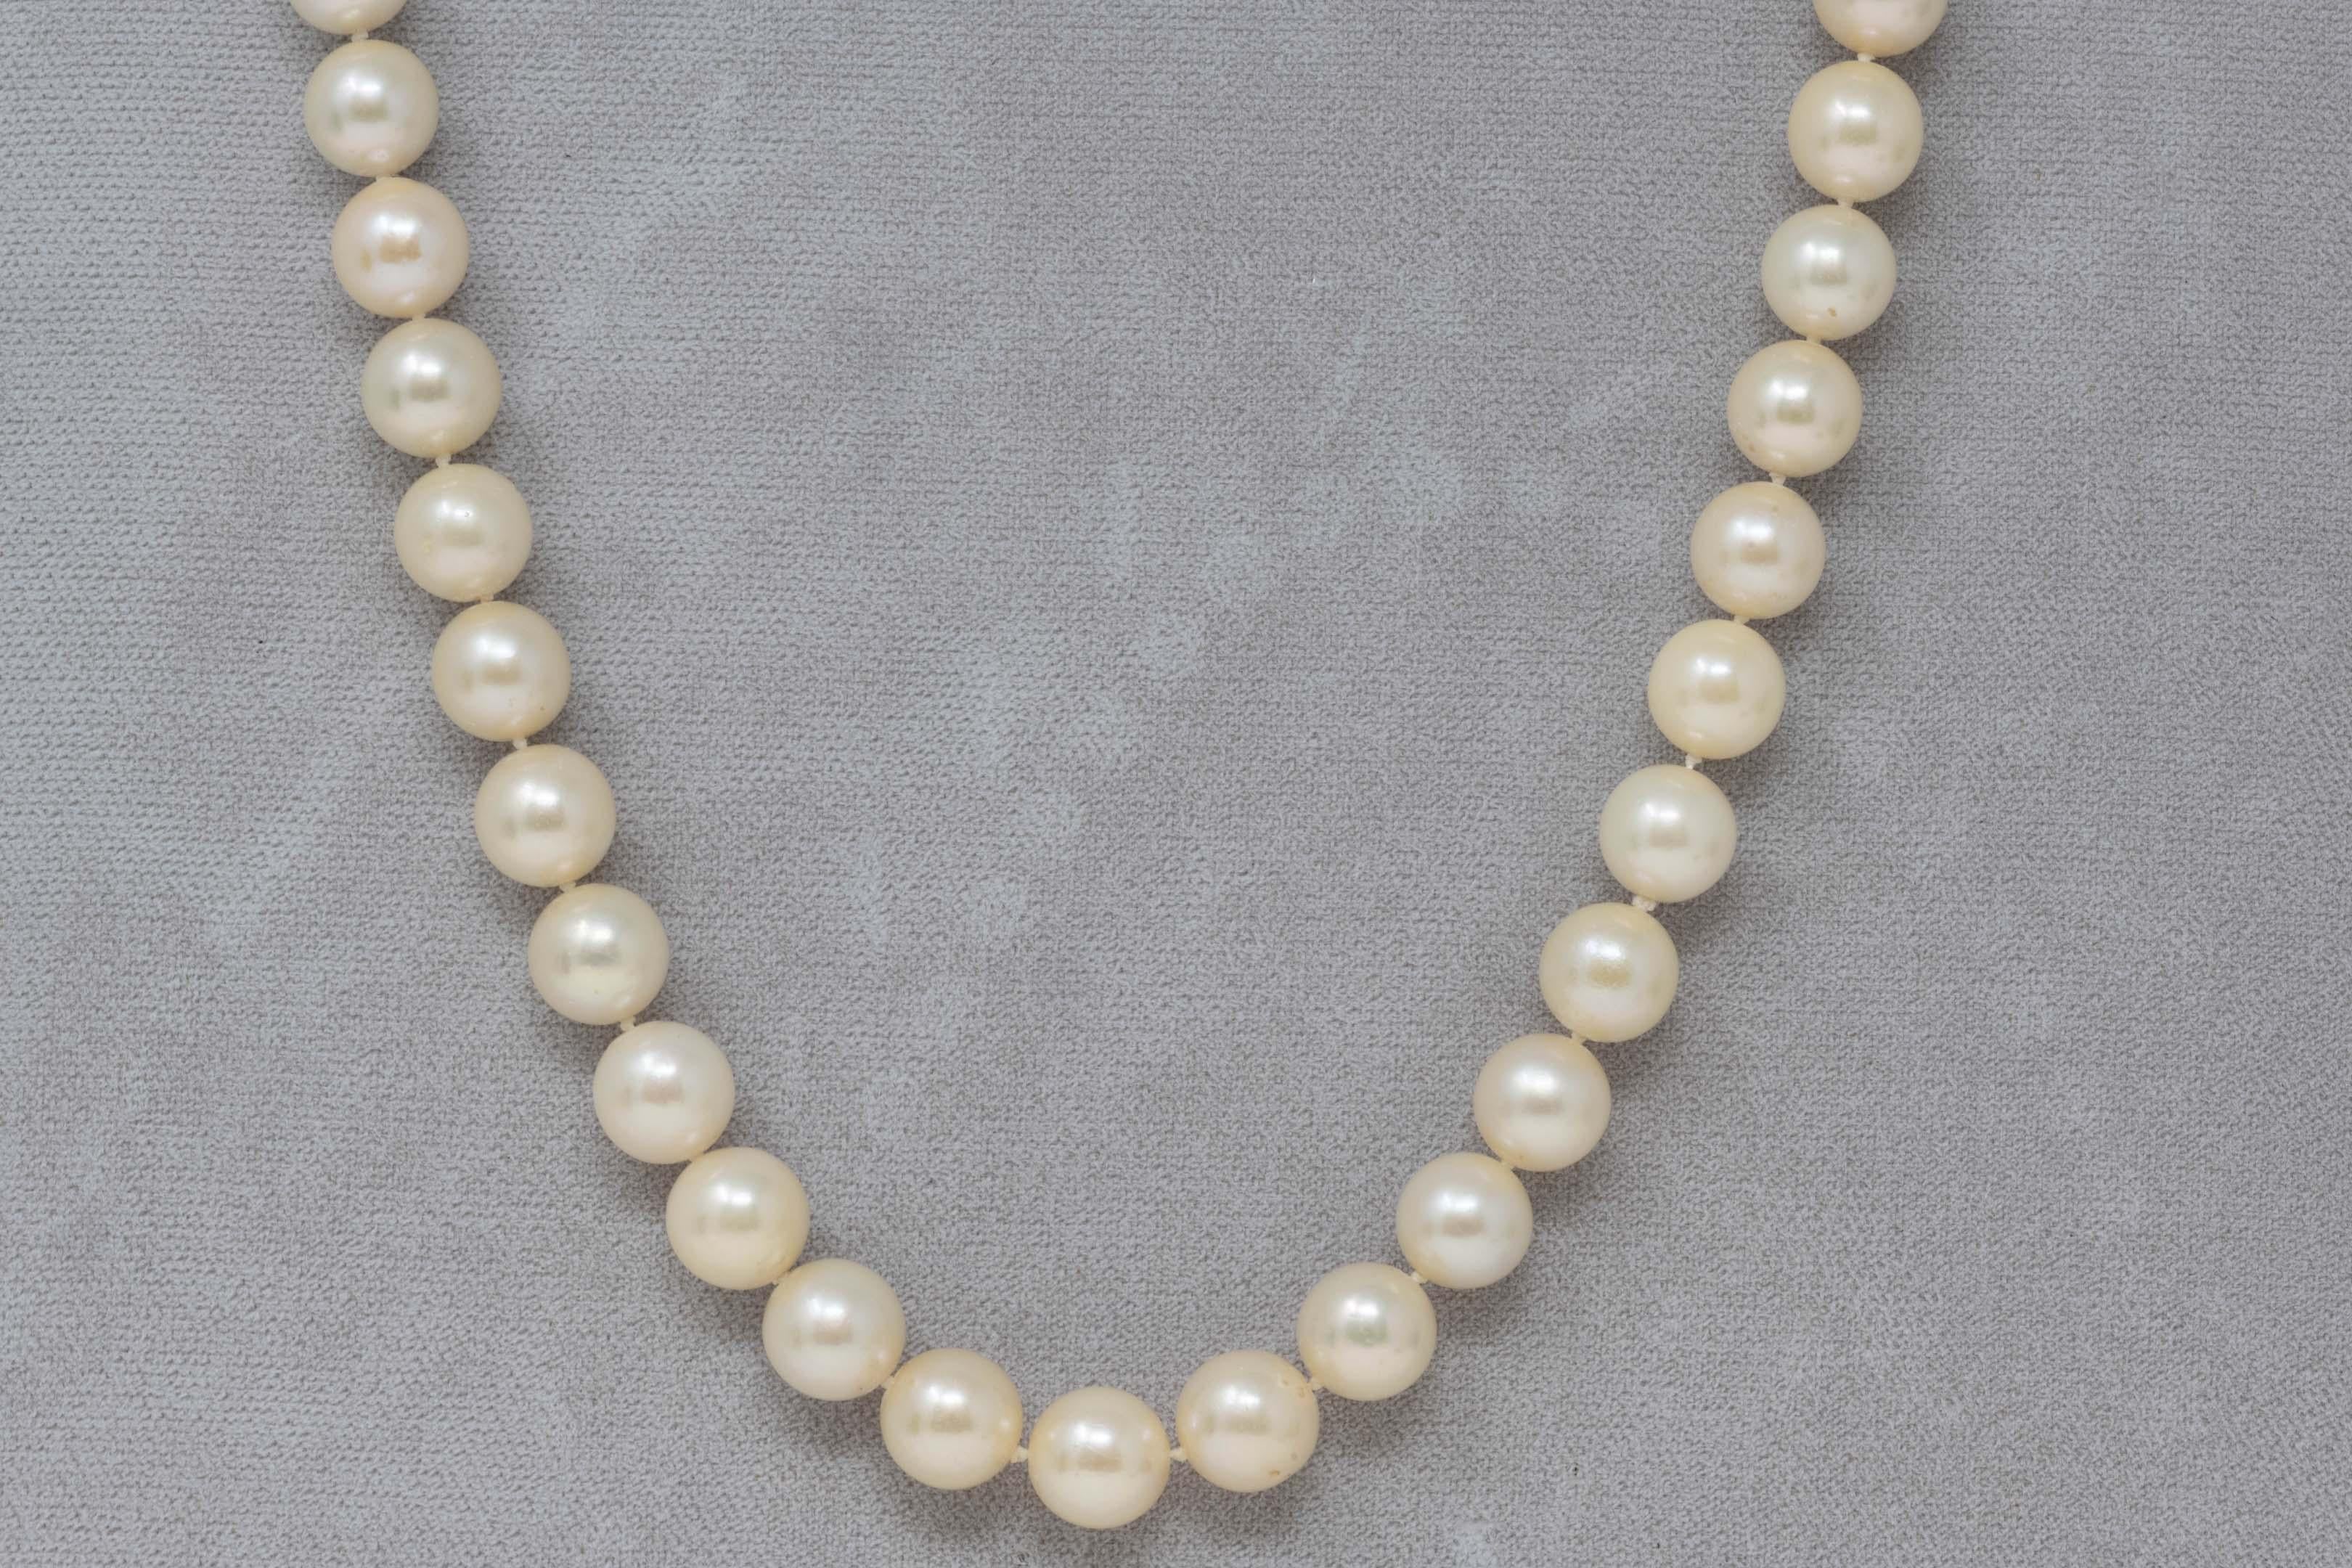 One (1) necklace made out of forty one (41) round/almost round cultured Akoya pearls. Uniform with pearls of 9.50-10.00 mm in diameter, measuring 16 inches. Primary color: cream. Overtones: green and pink. Luster and orient: medium. Surface quality: